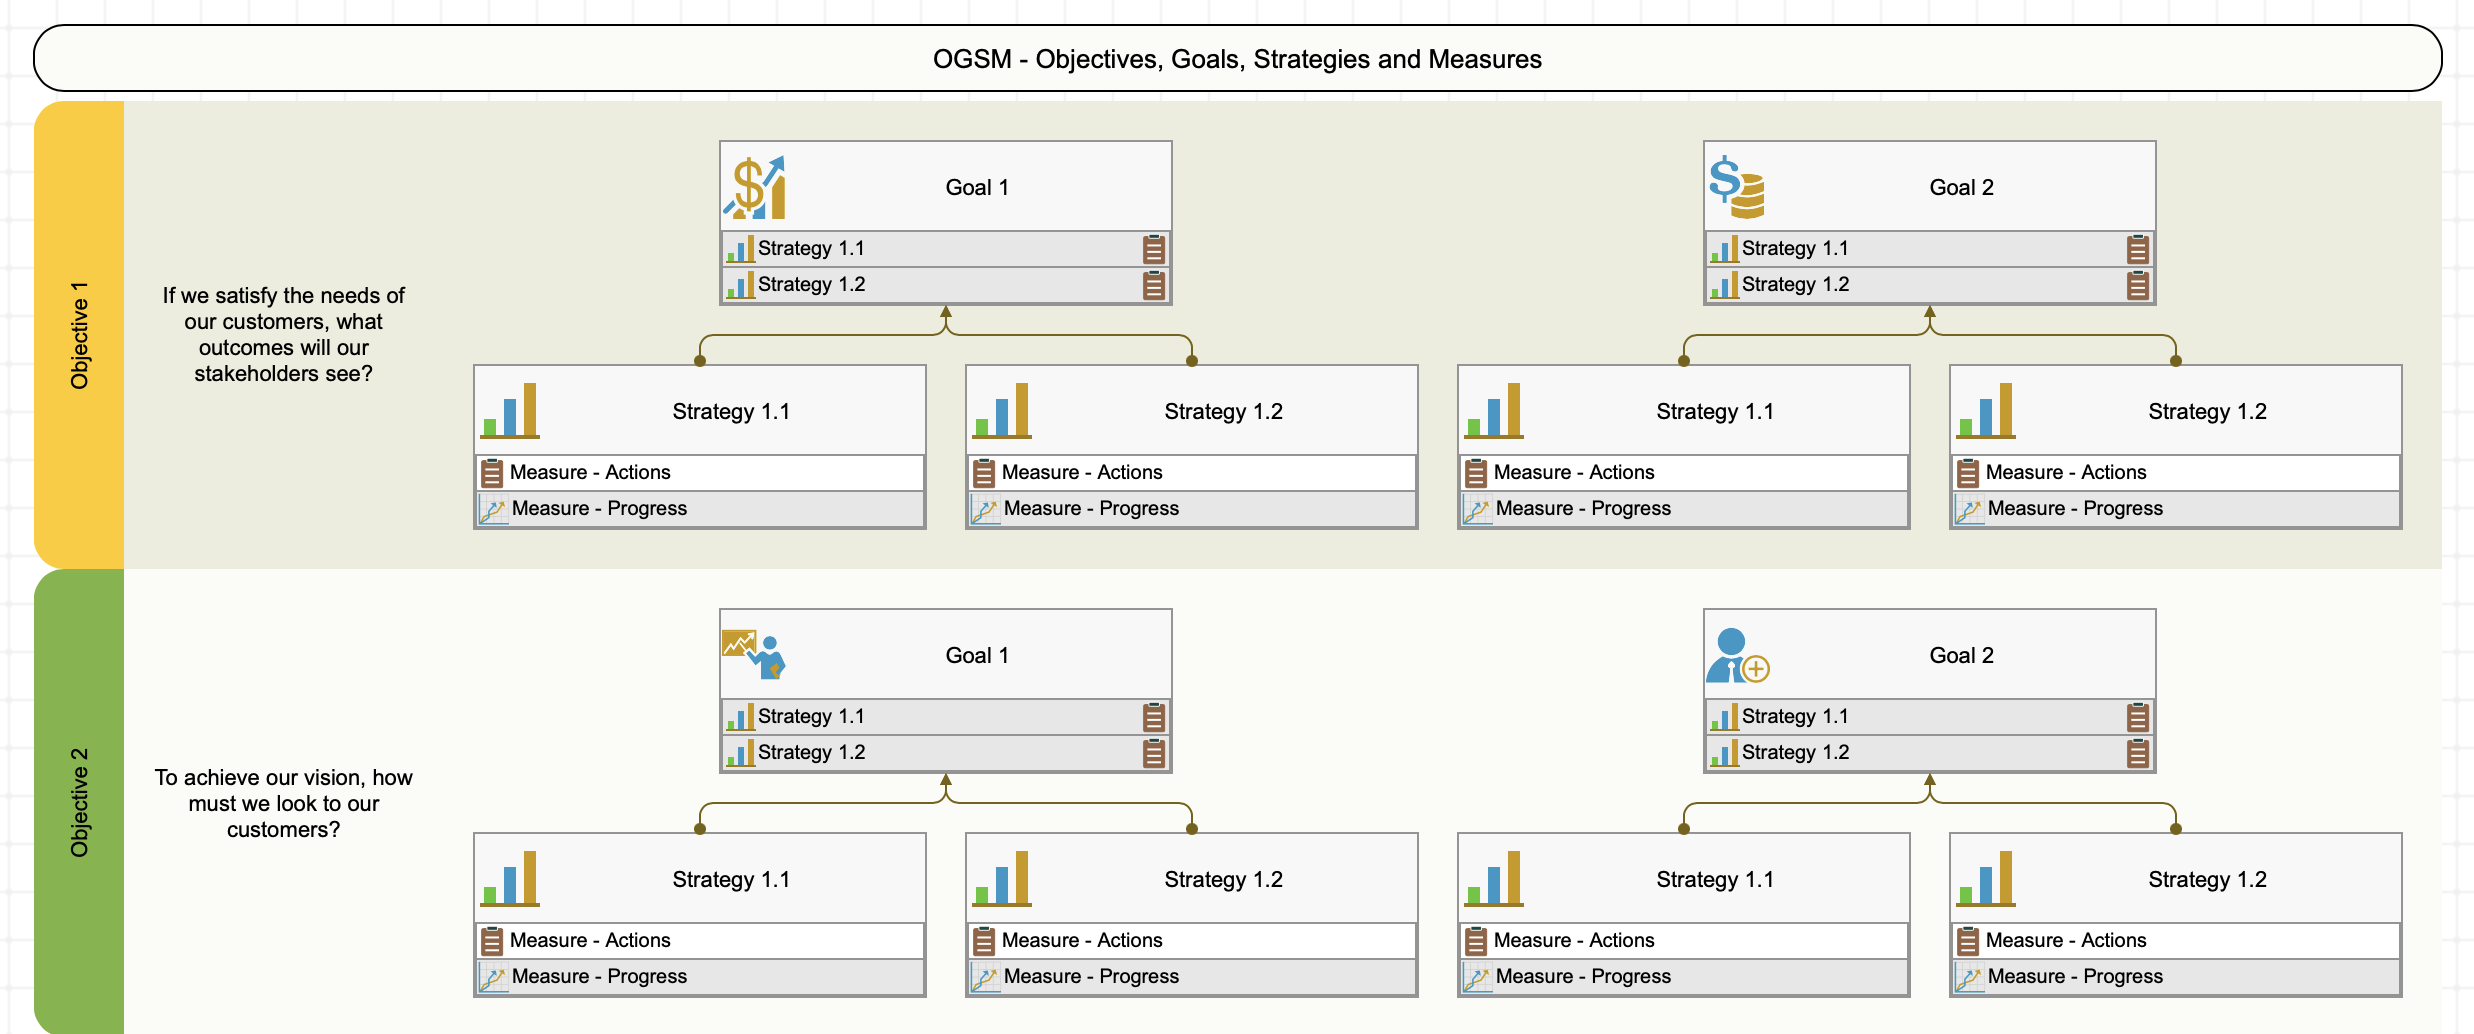 The OGSM template in BSC Designer provides a structured framework for organizations to define their Objectives, Goals, Strategies, and Measures.